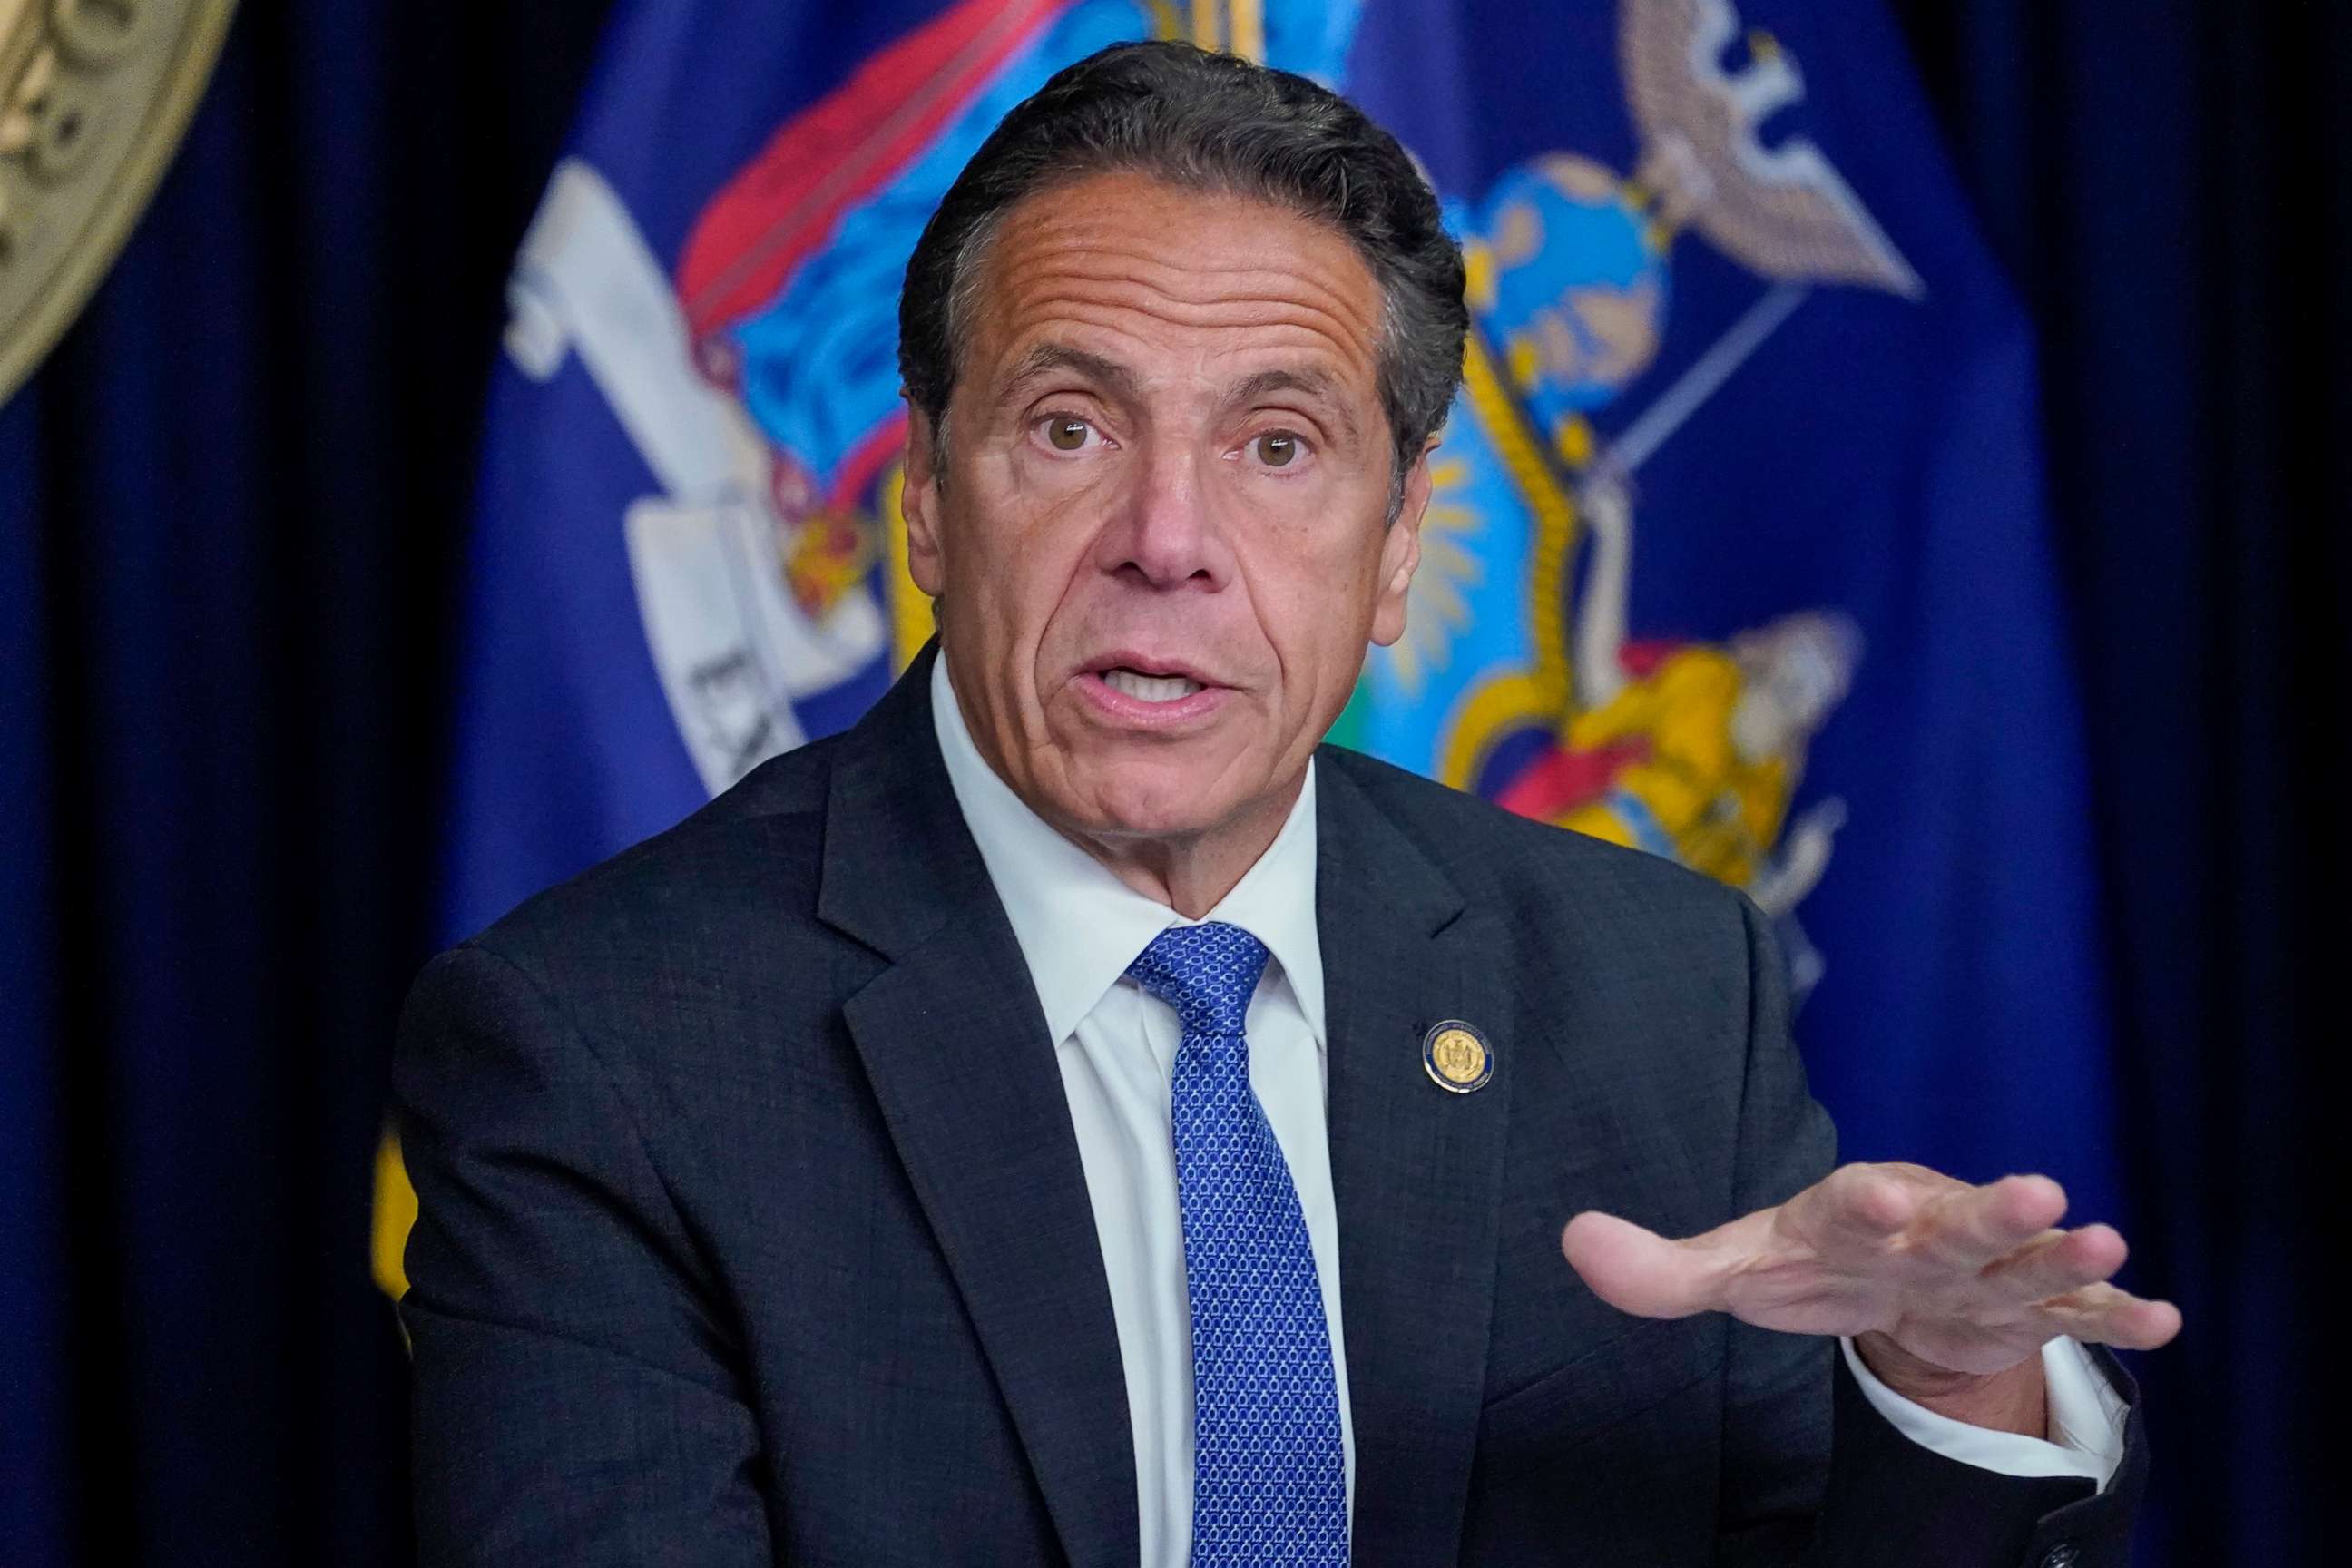 PHOTO: New York Gov. Andrew Cuomo speaks during a news conference in New York, June 23, 2021.